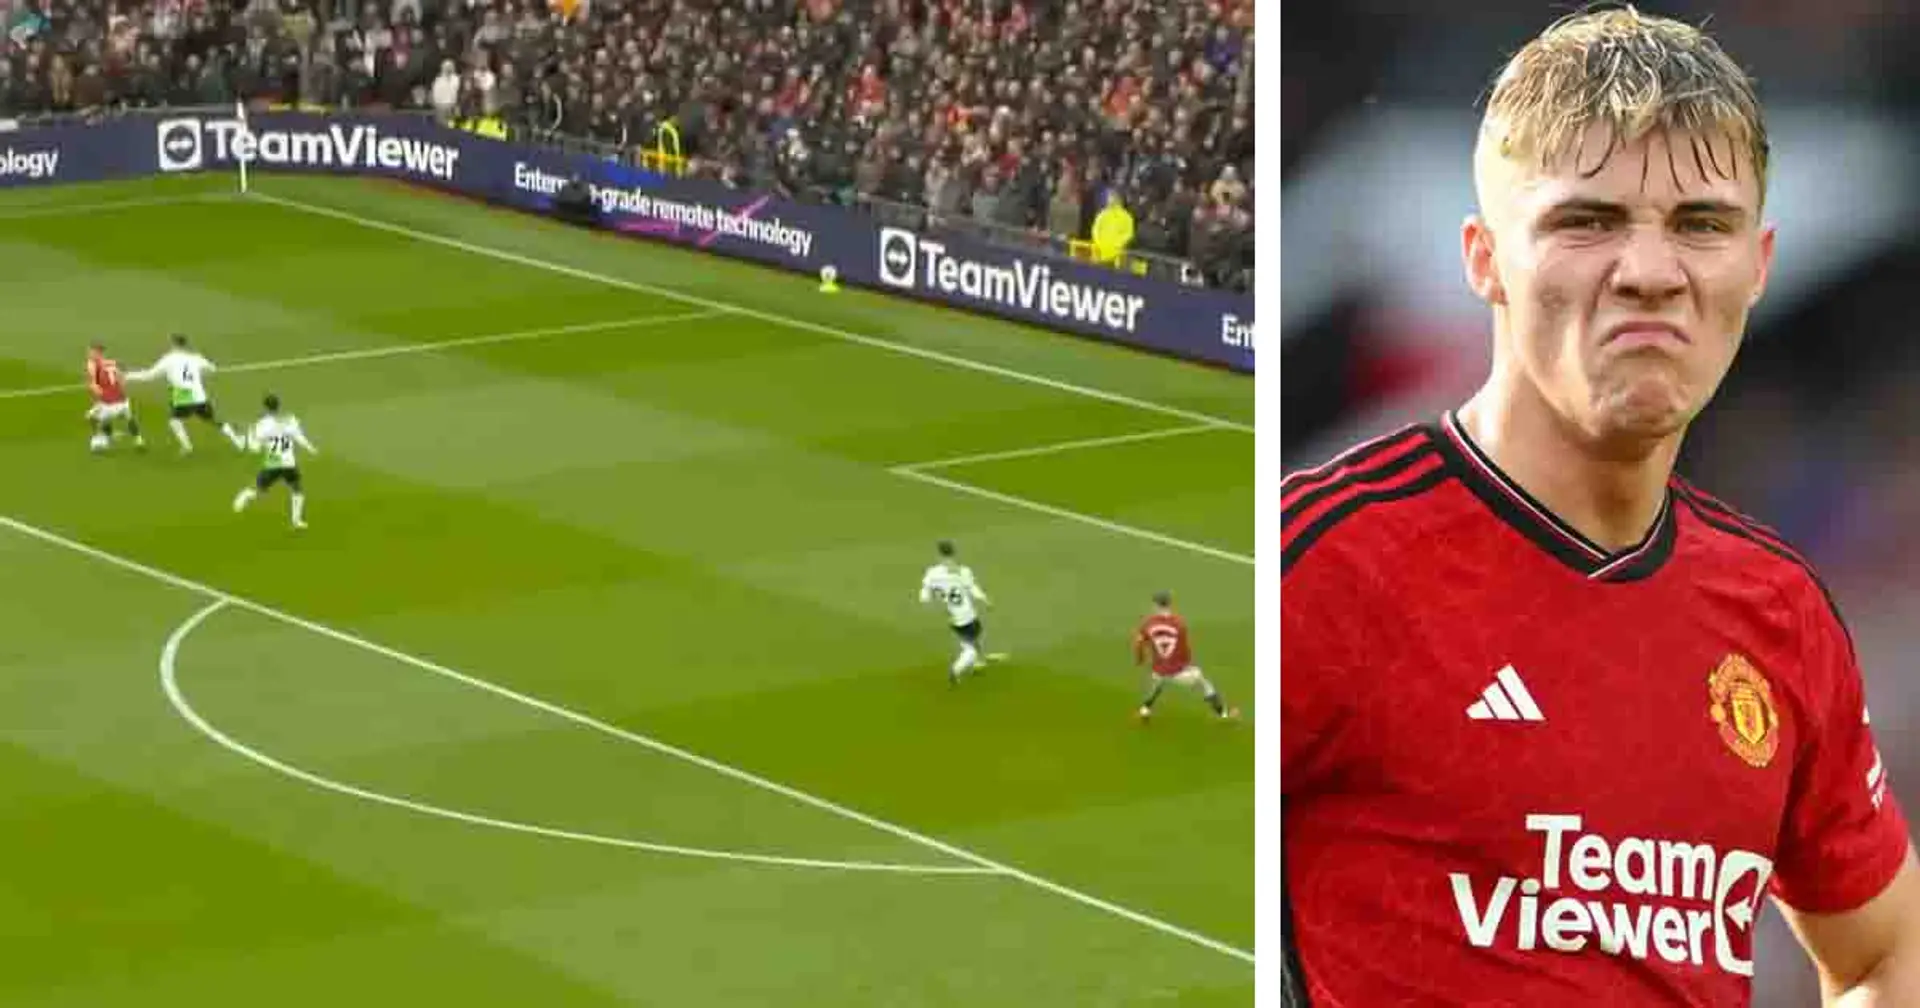 'Losing my patience': Some Man United frustrated with Hojlund for scuffing potential goal vs Liverpool